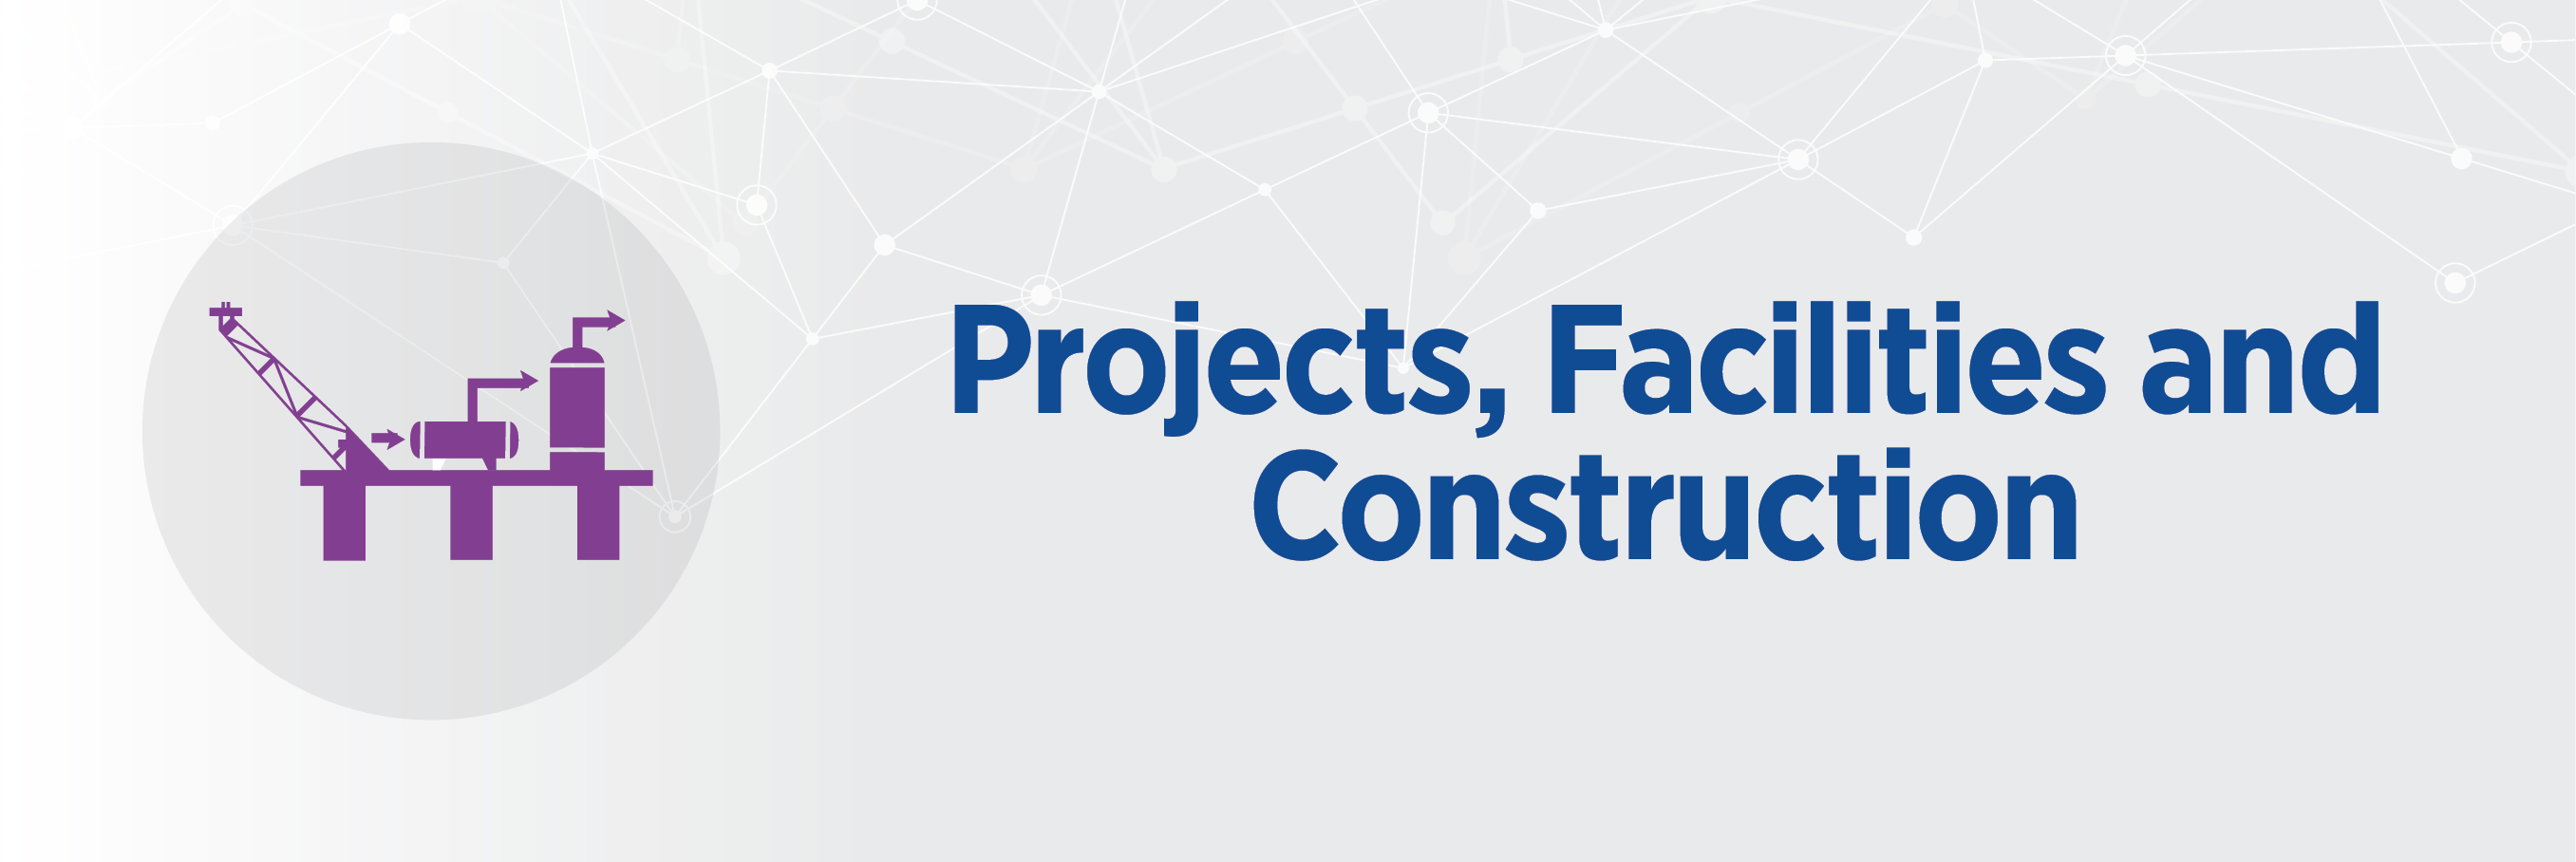 Projects, Facilities, and Construction